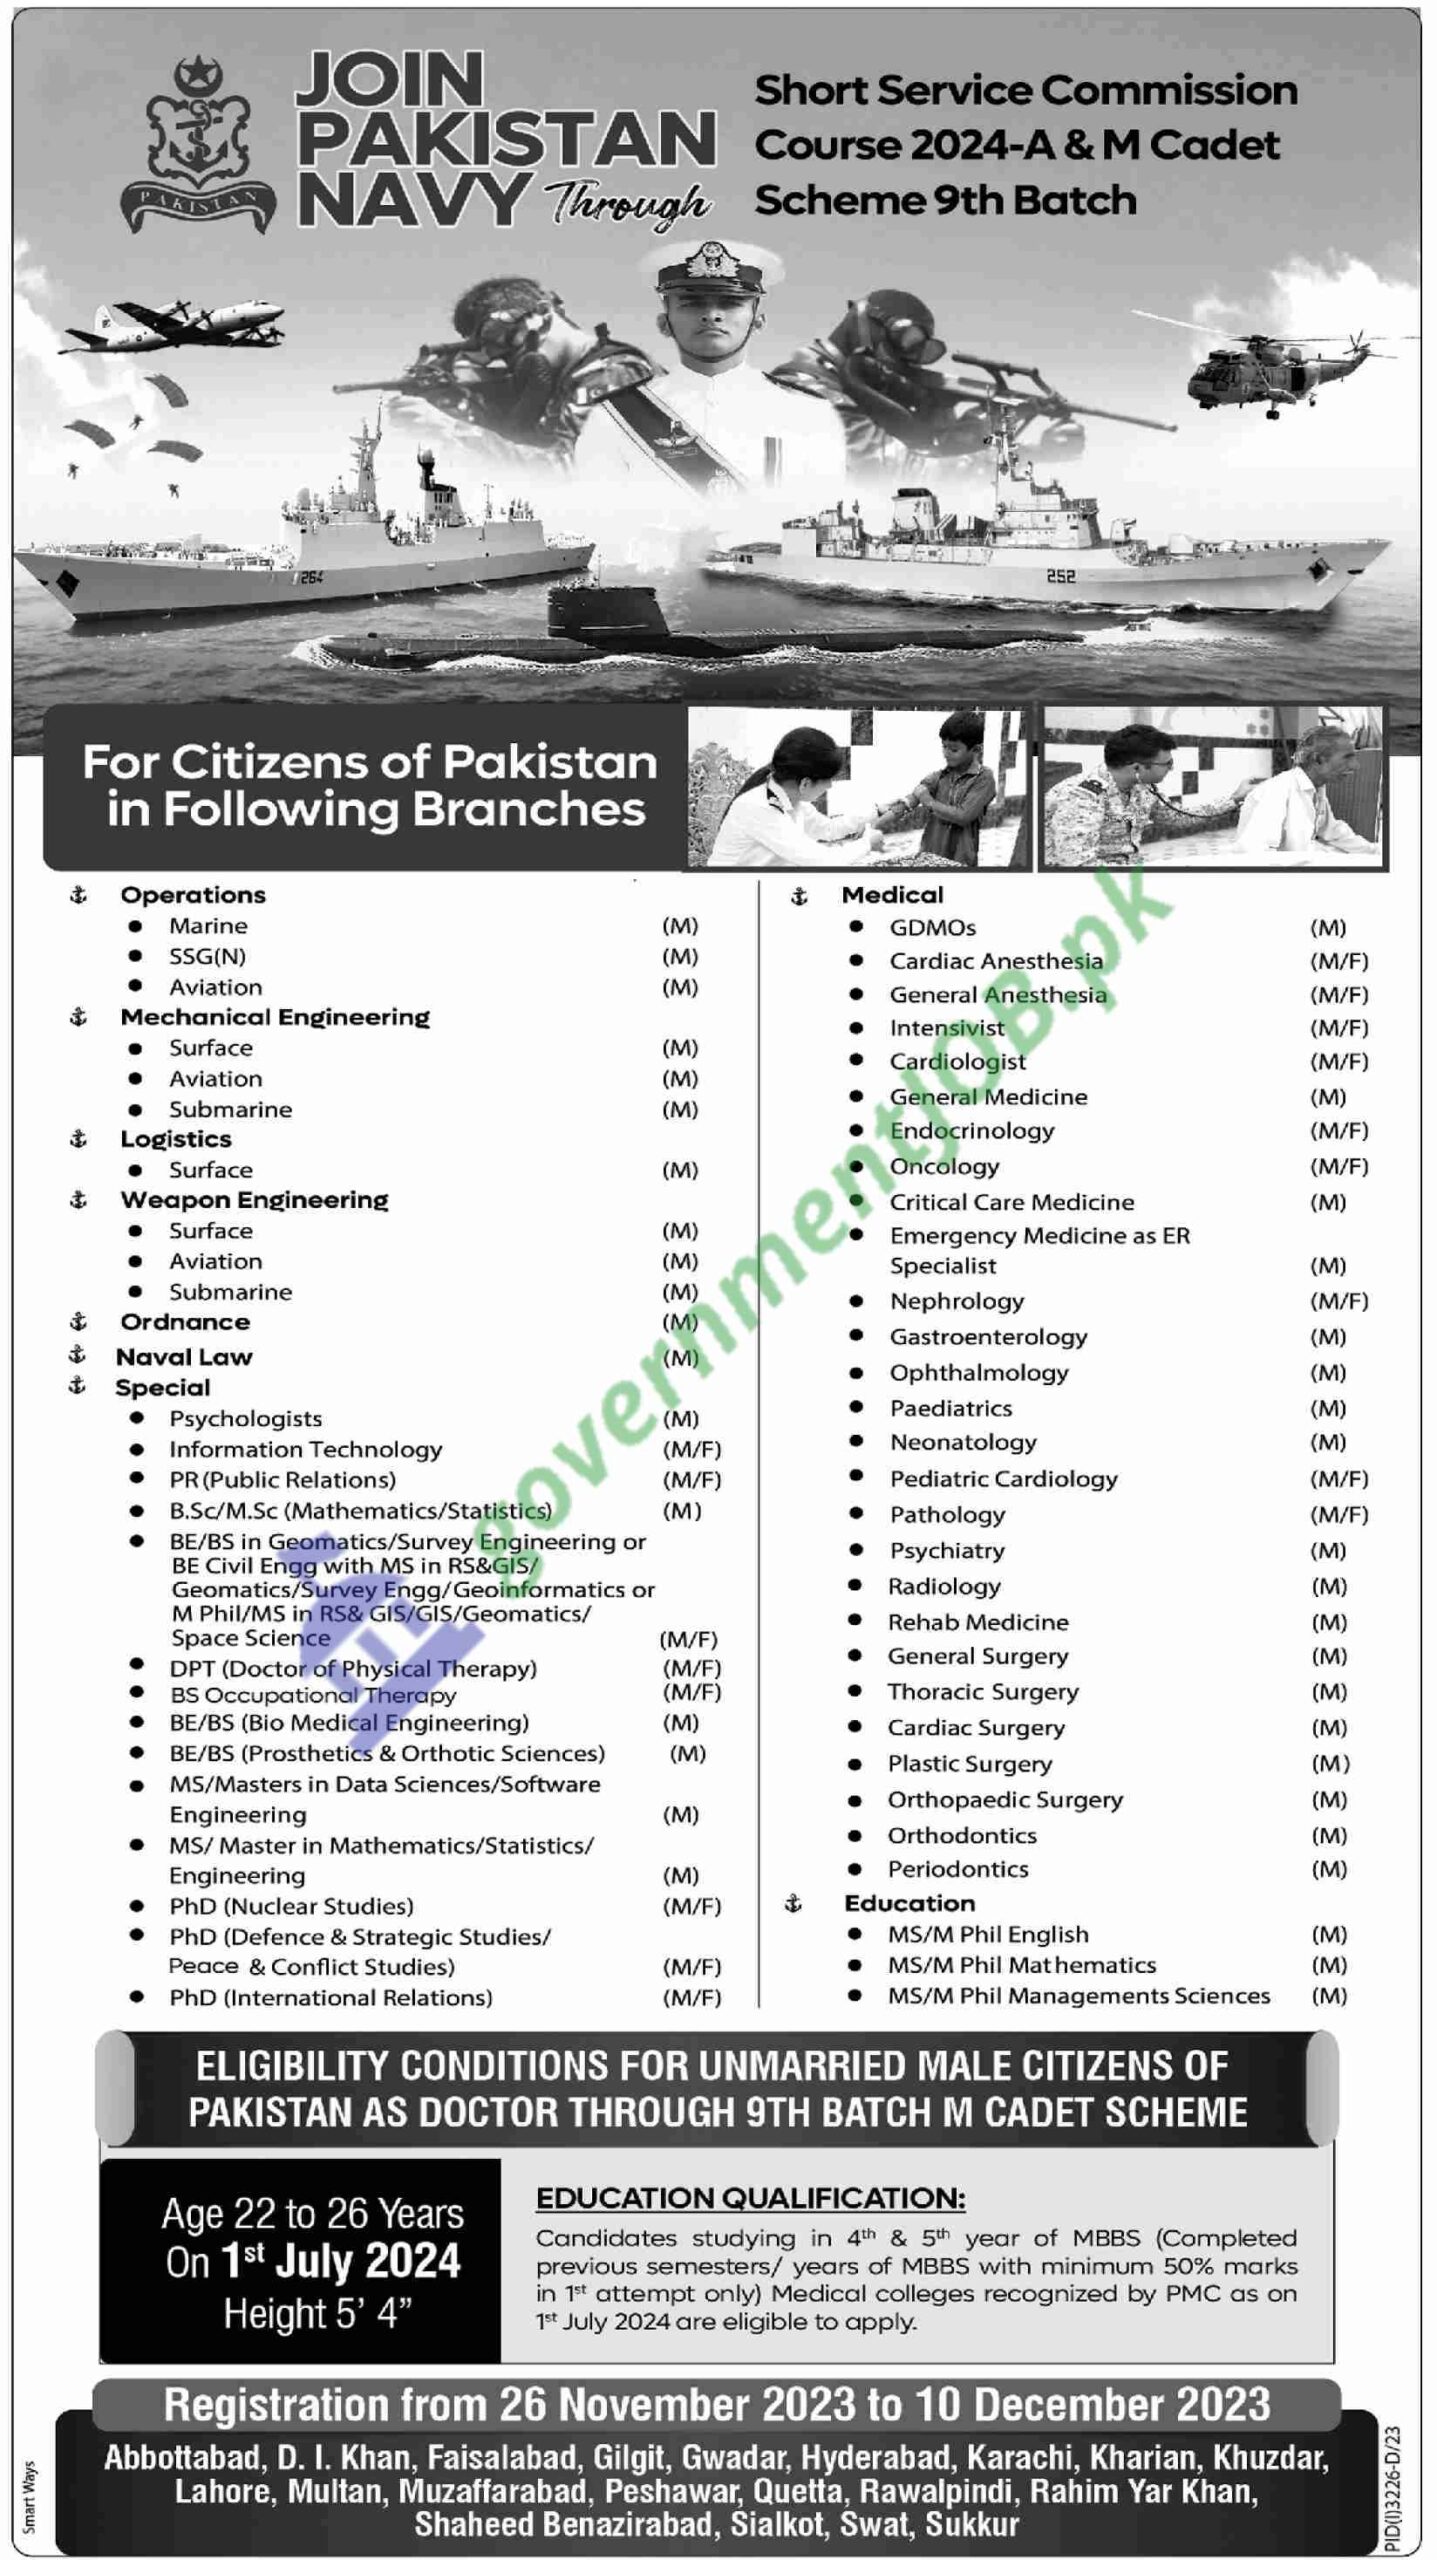 Join Pakistan Navy as Short Service Commission 2023